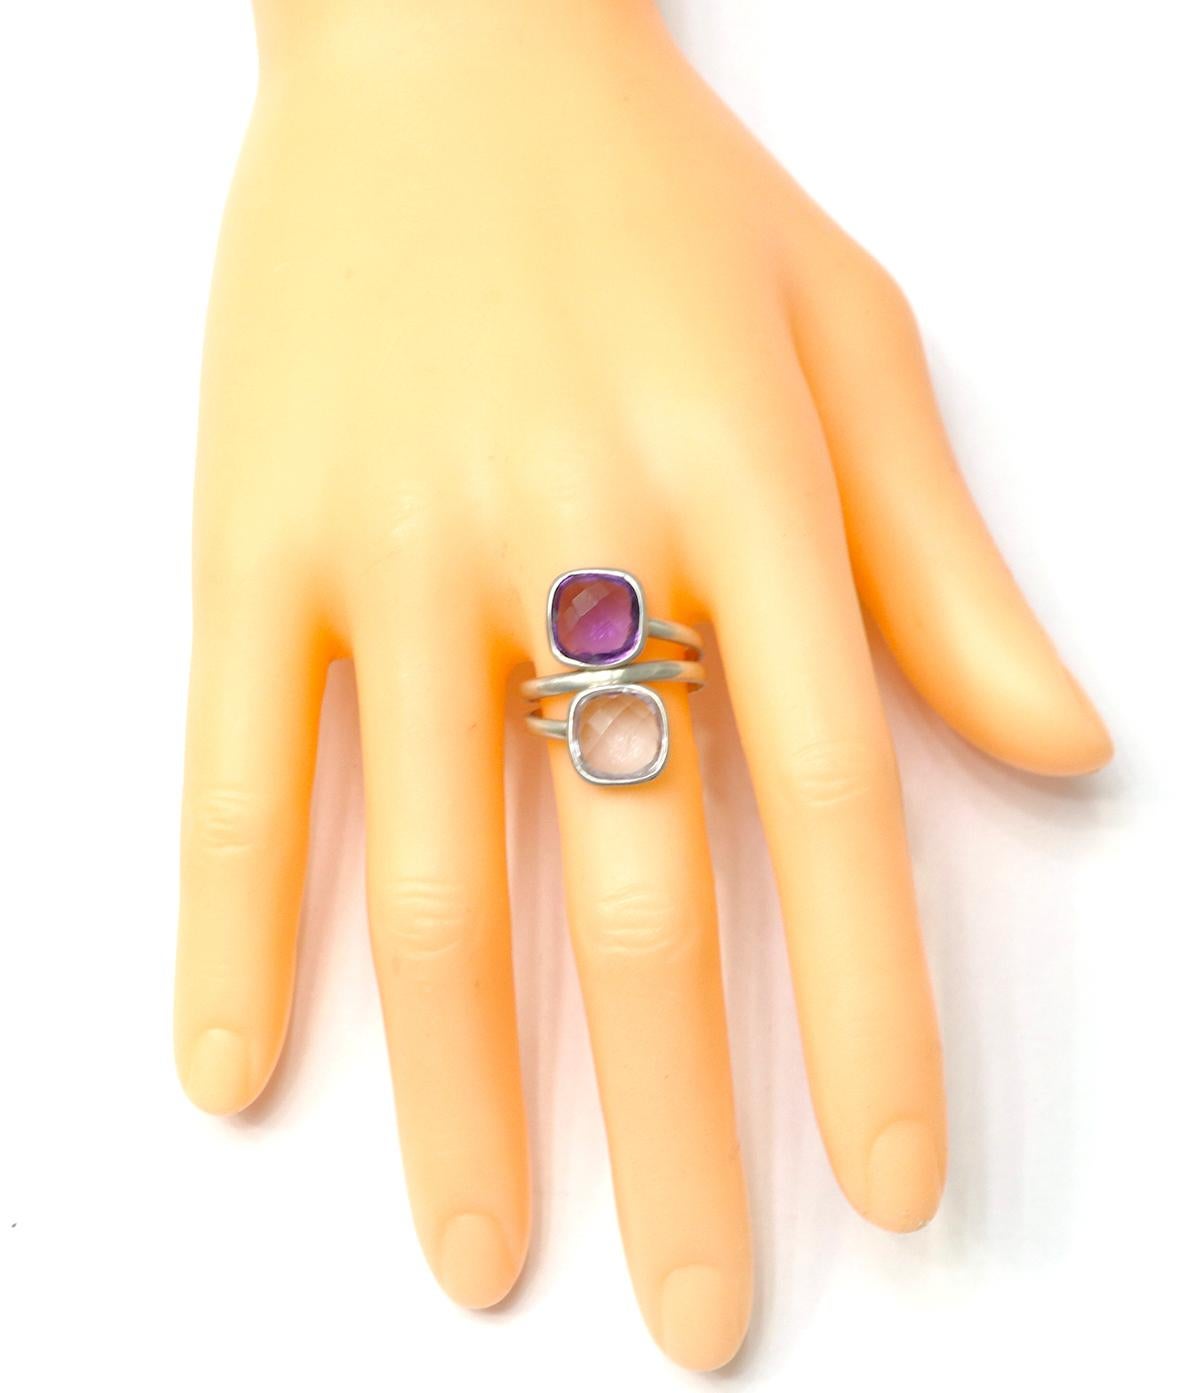 18 Karat White Gold 7.22 Carat Purple and Pink Amethyst Two-Stone Ring

Timeless yet stylish, puristic yet brilliant. This ring is a modern take on the classic spiral trend. Two glistening white gold bands intertwine in elegant, gentle curves with